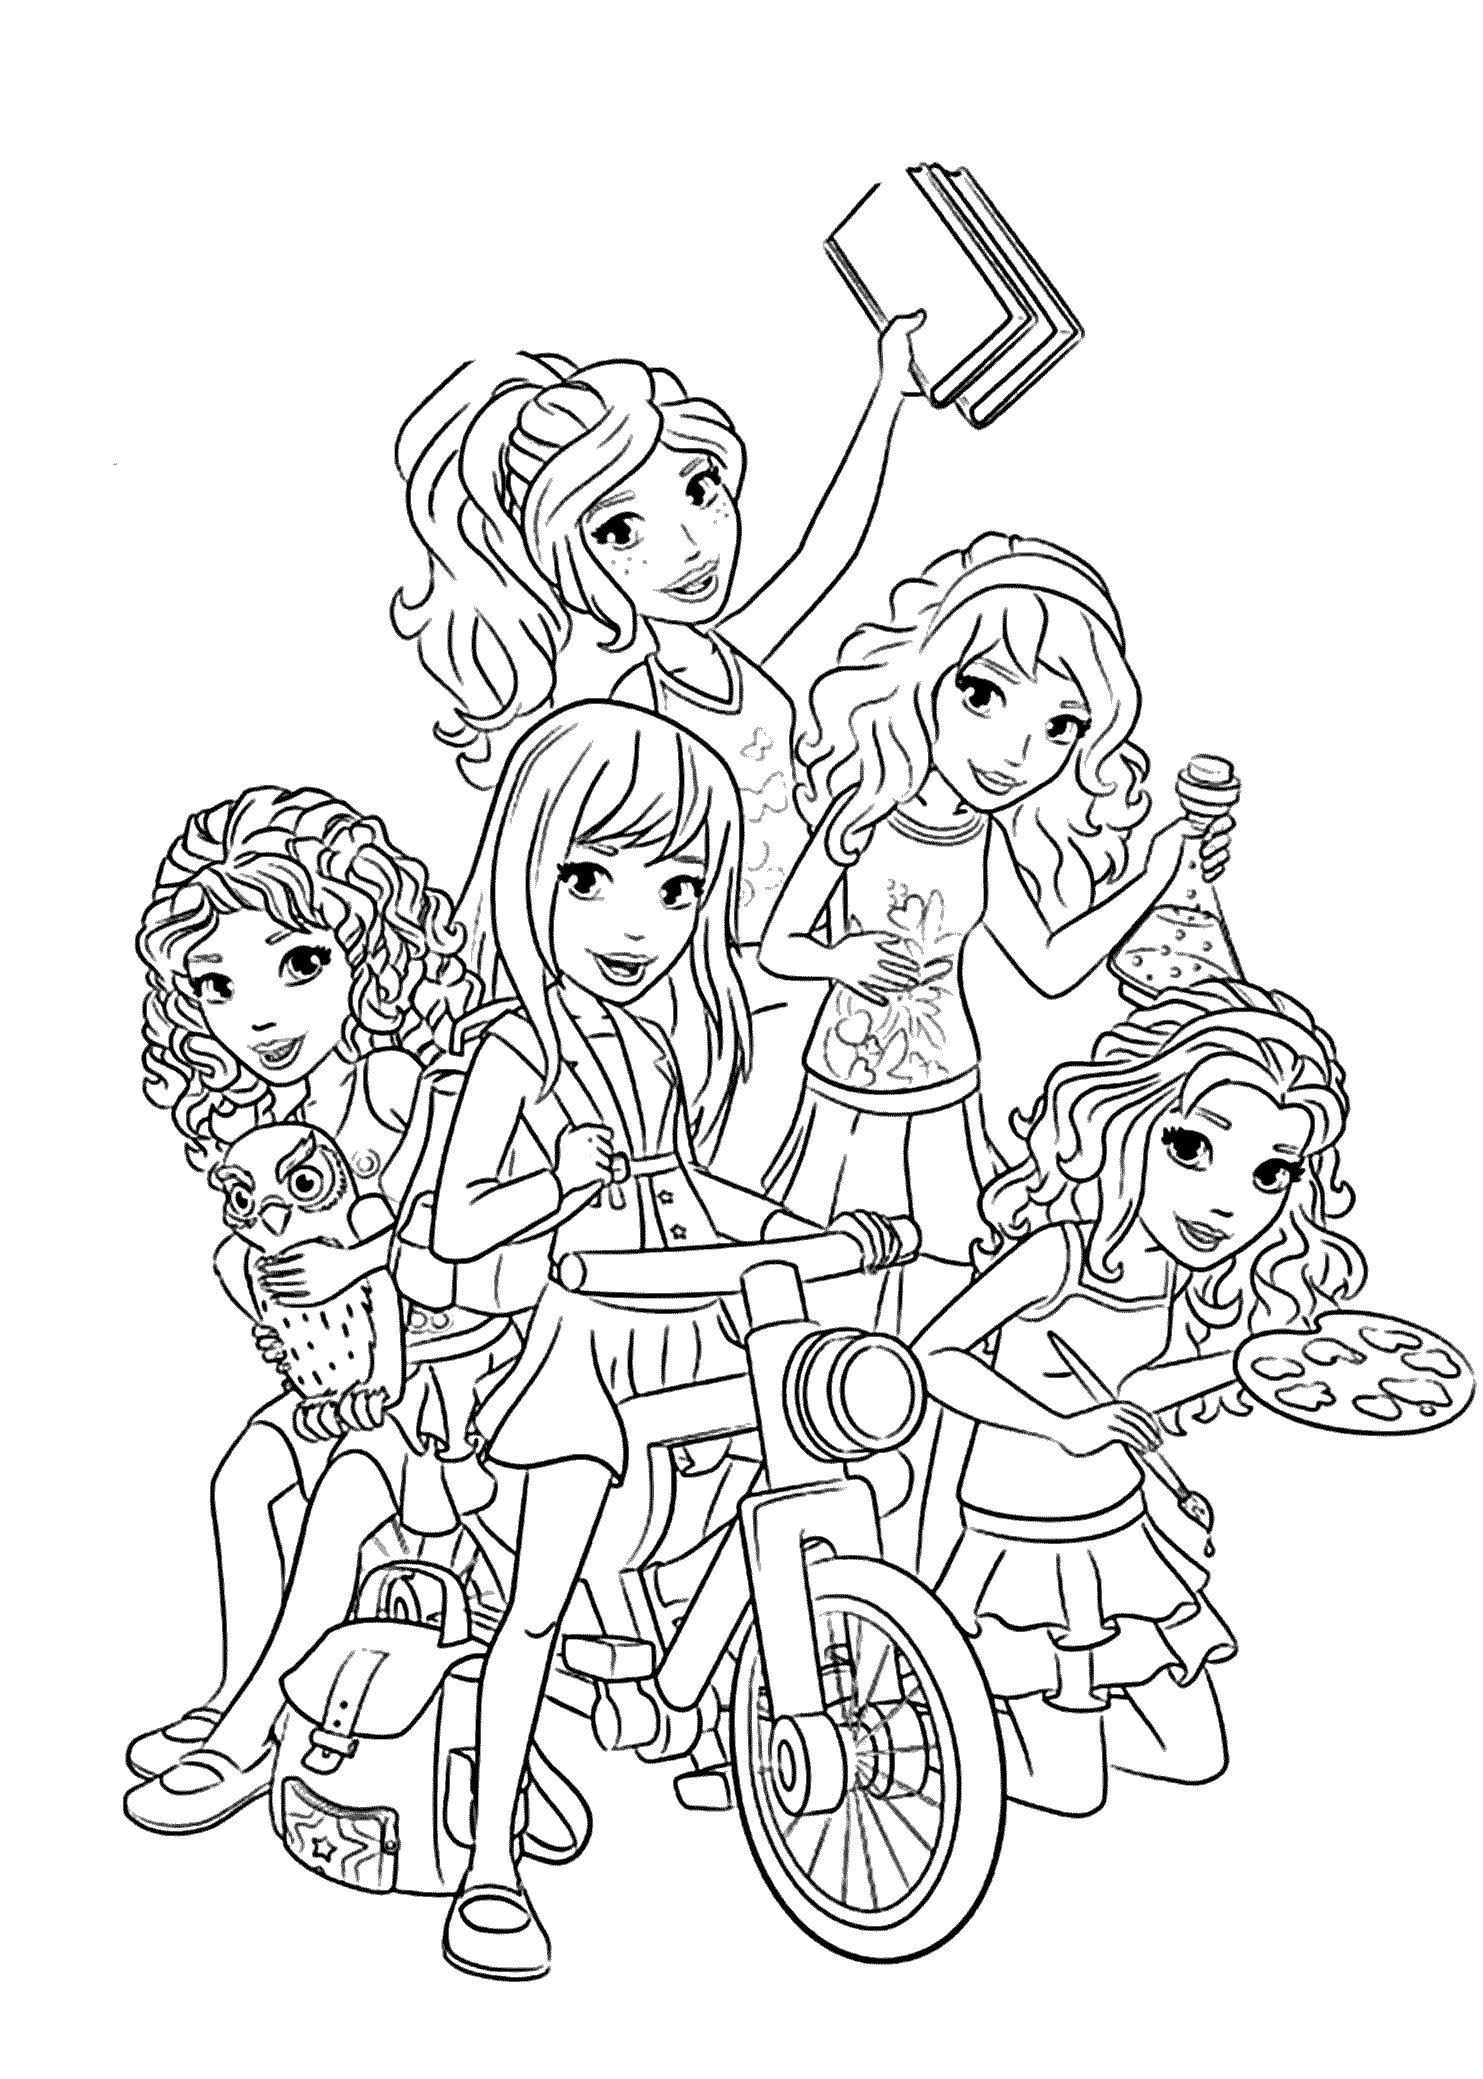 Lego Friends Coloring